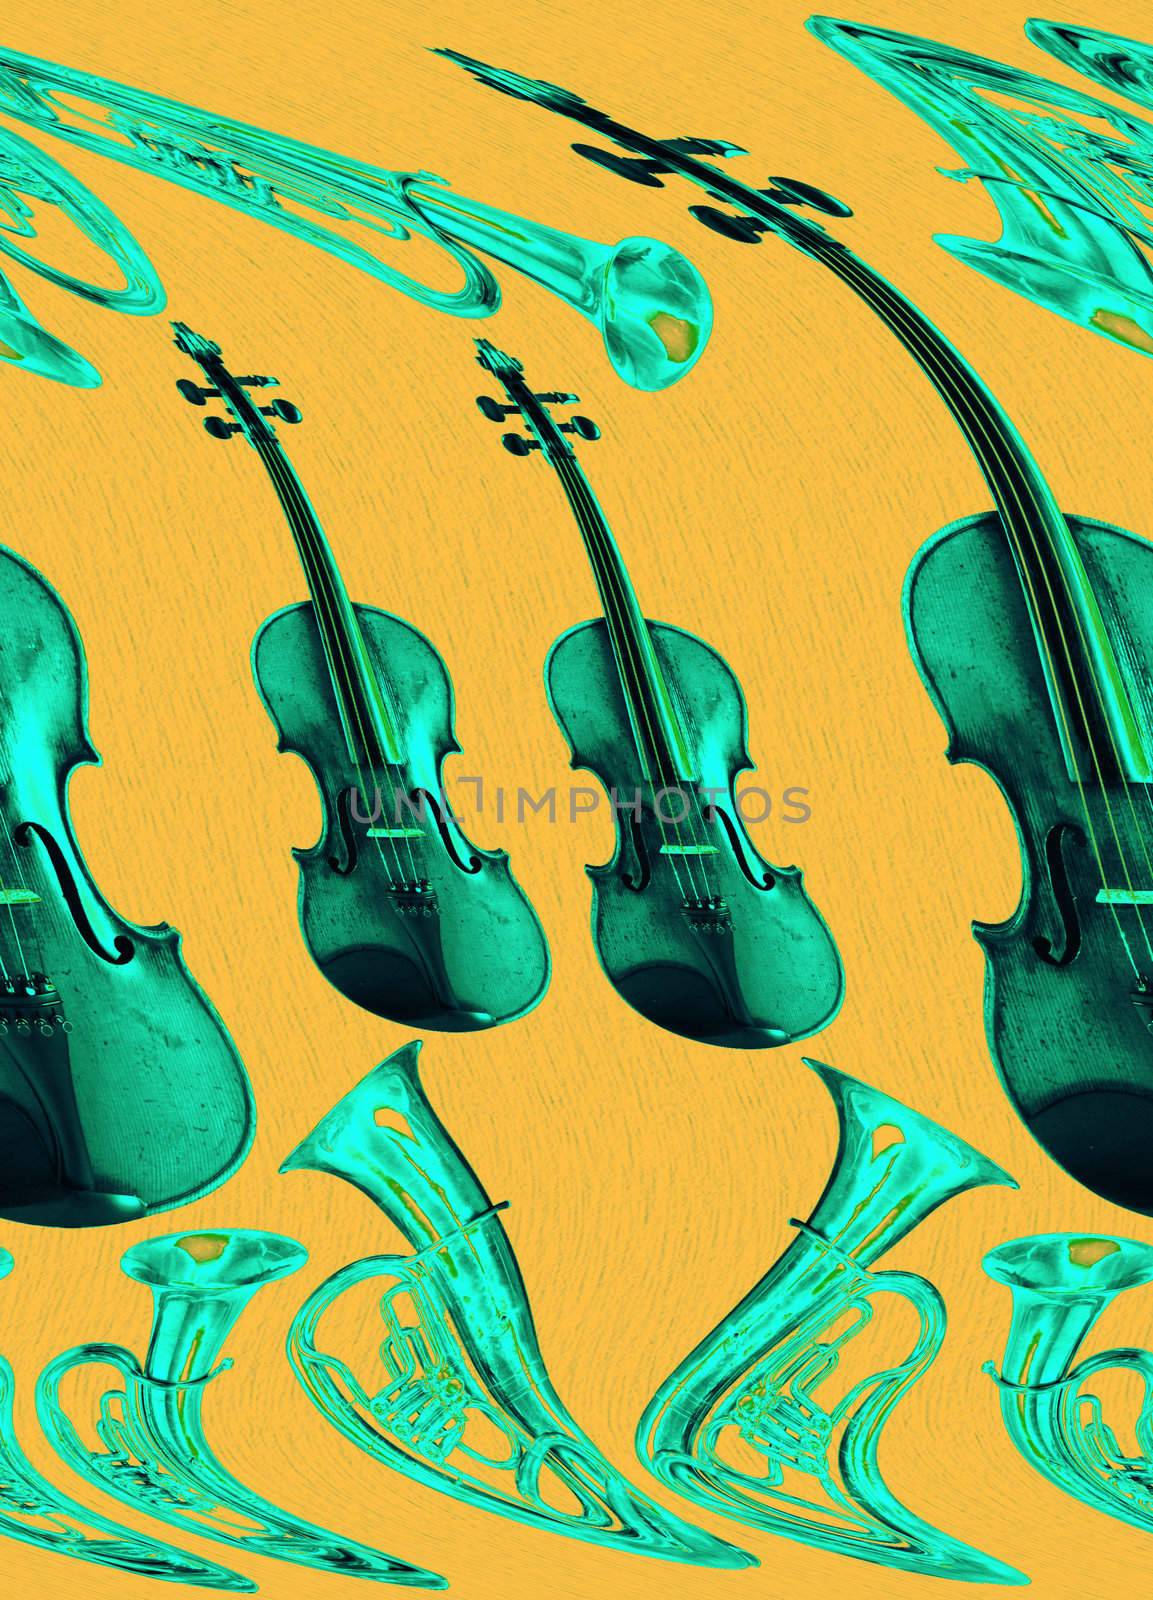 The abstract image of a violin and tuba on a yellow background